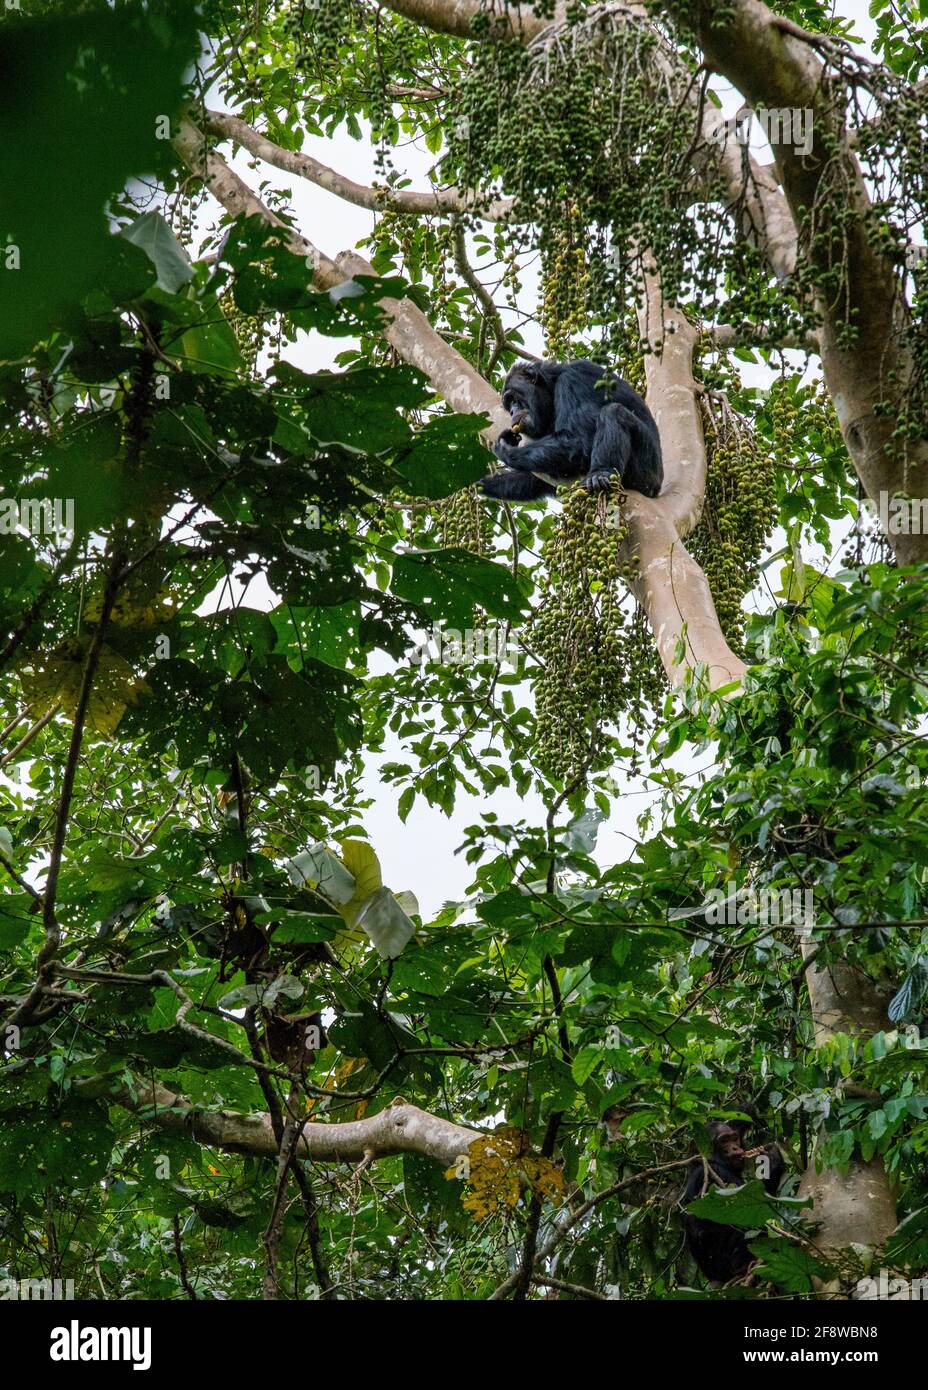 Wild Chimpanzee (Pan troglodytes) eating figs in the African forest in Uganda, Africa Stock Photo